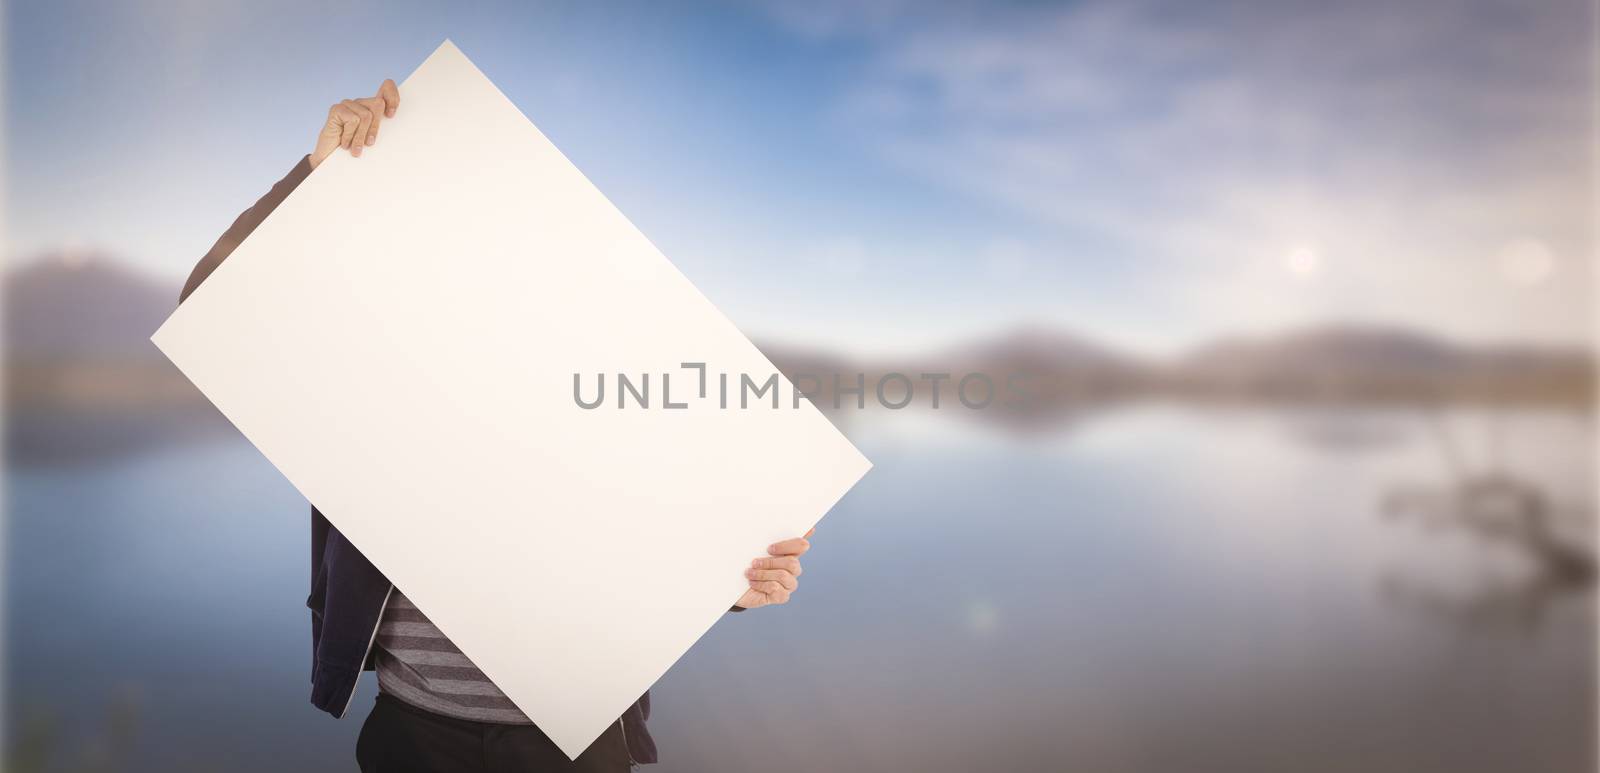 Man holding billboard in front of face against lake